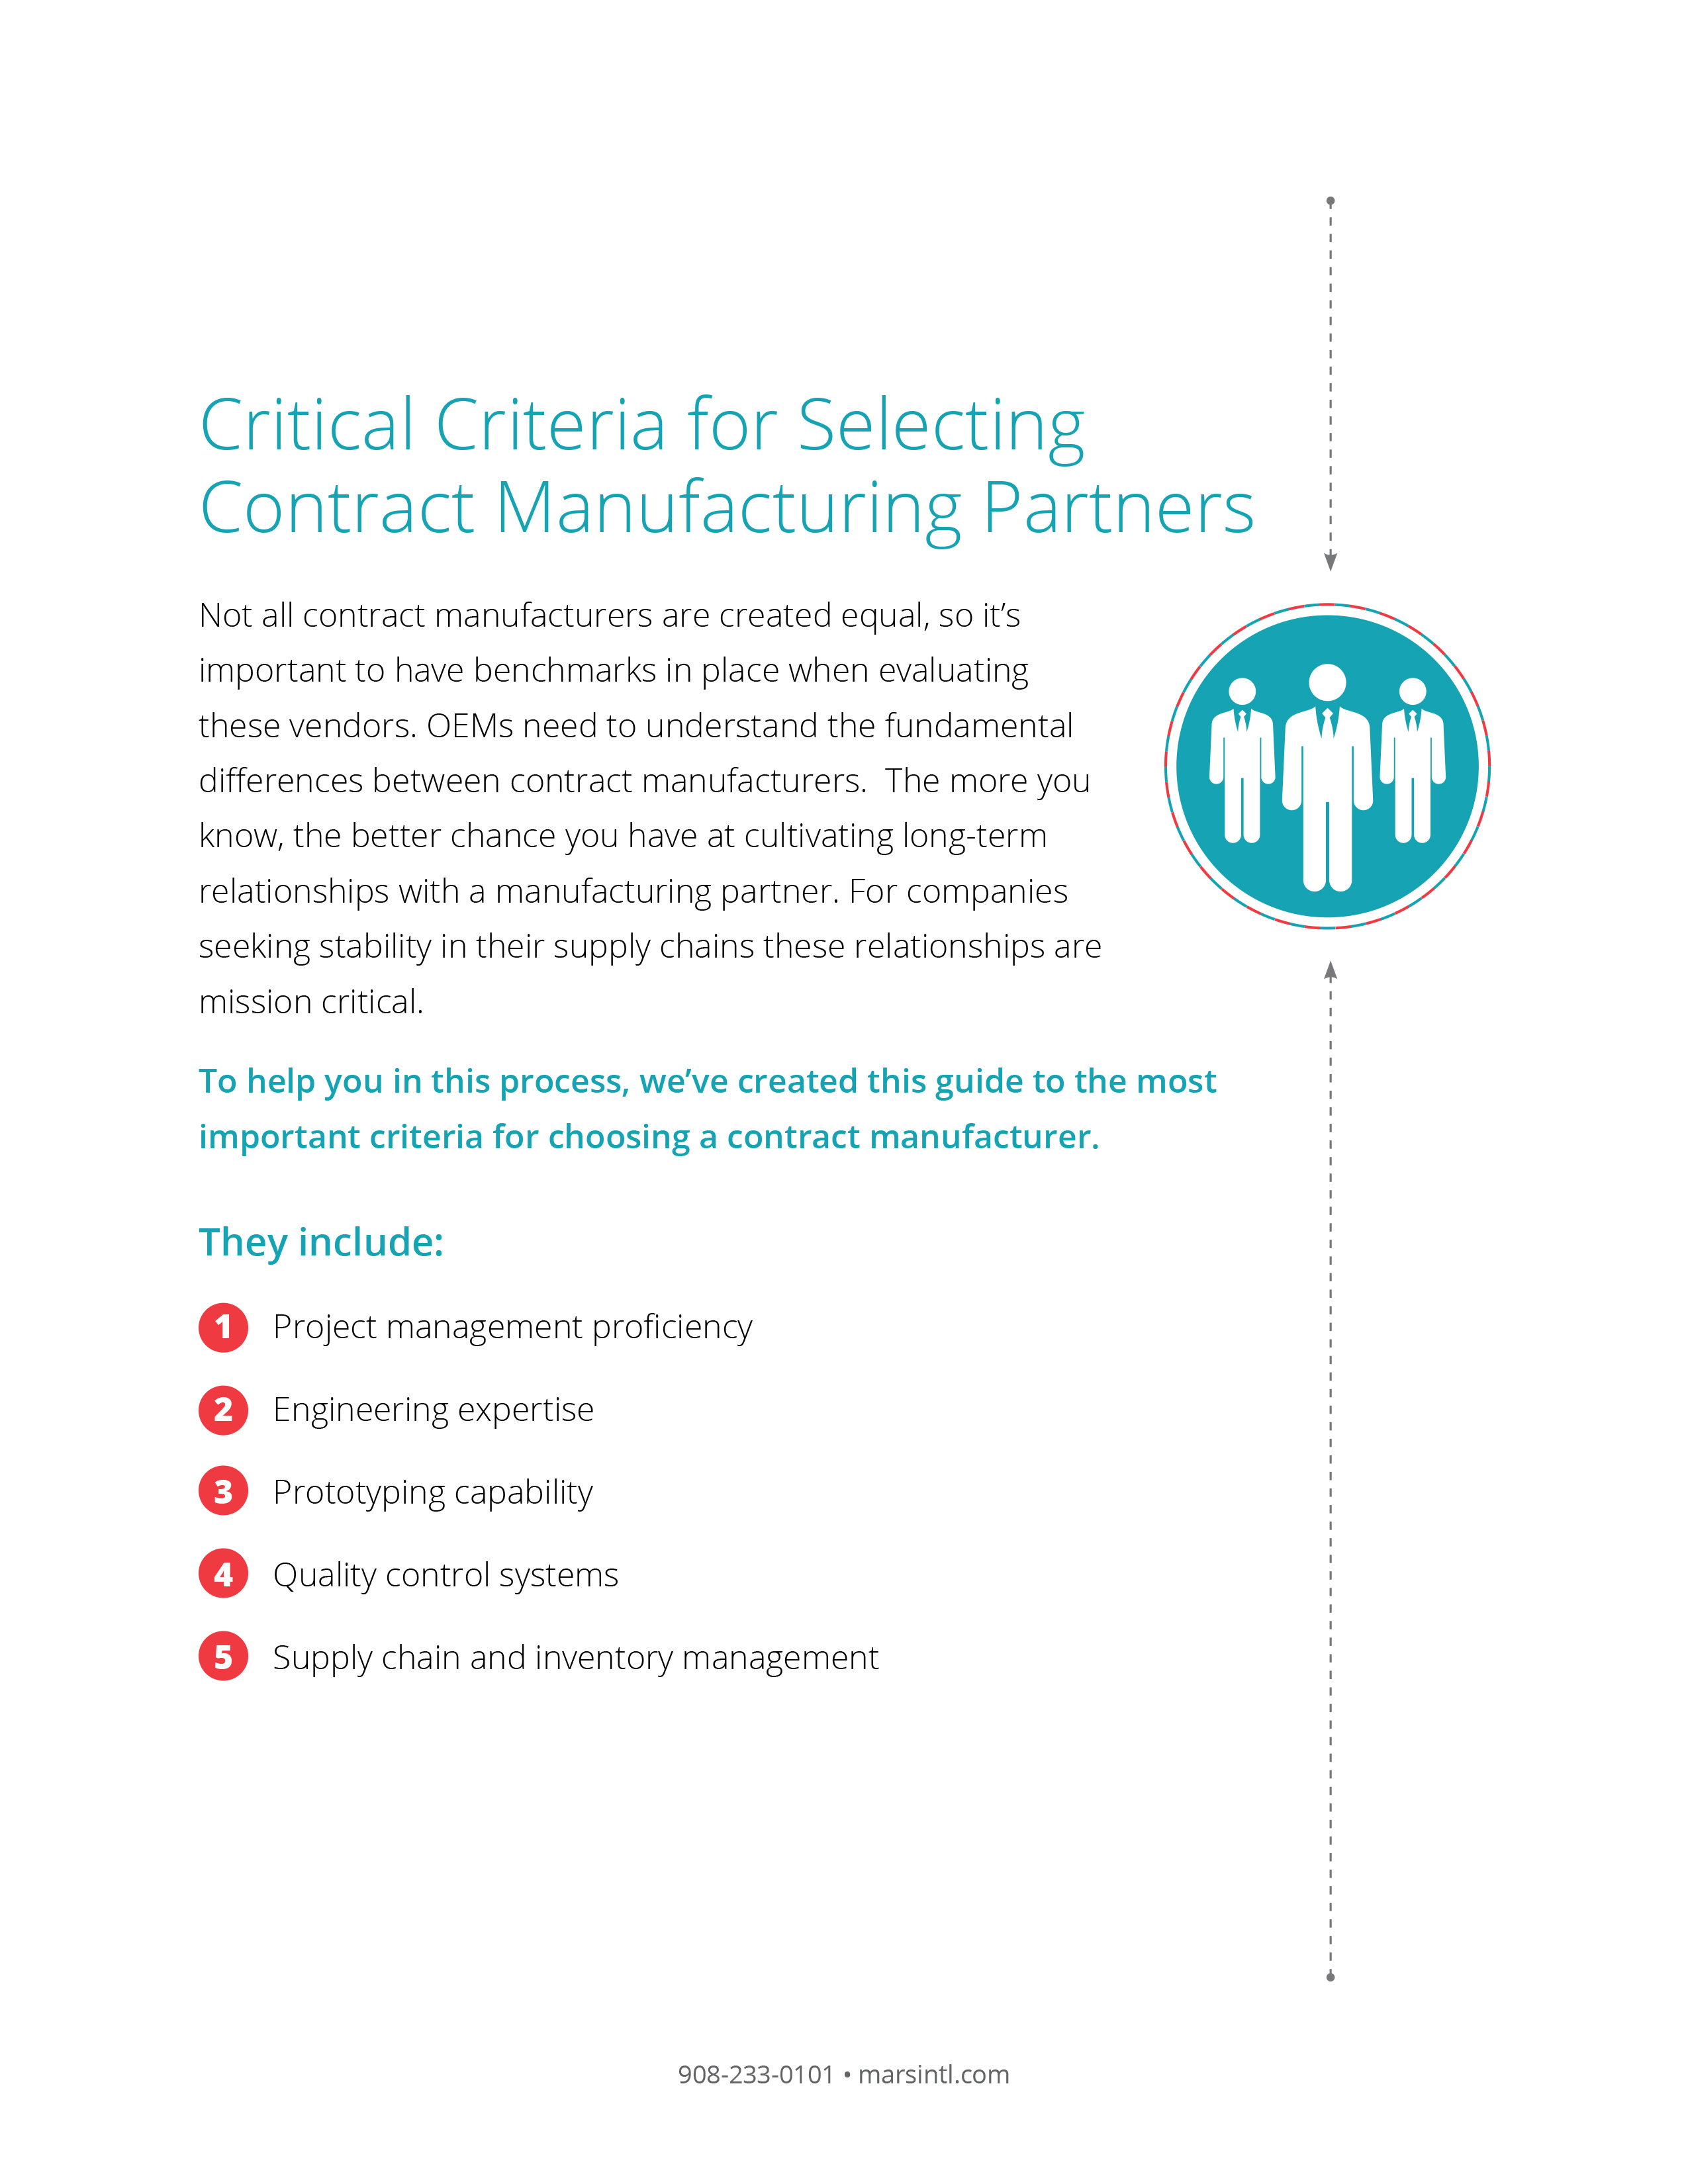 Critical Criteria for Selecting Contract Manufacturing Partners